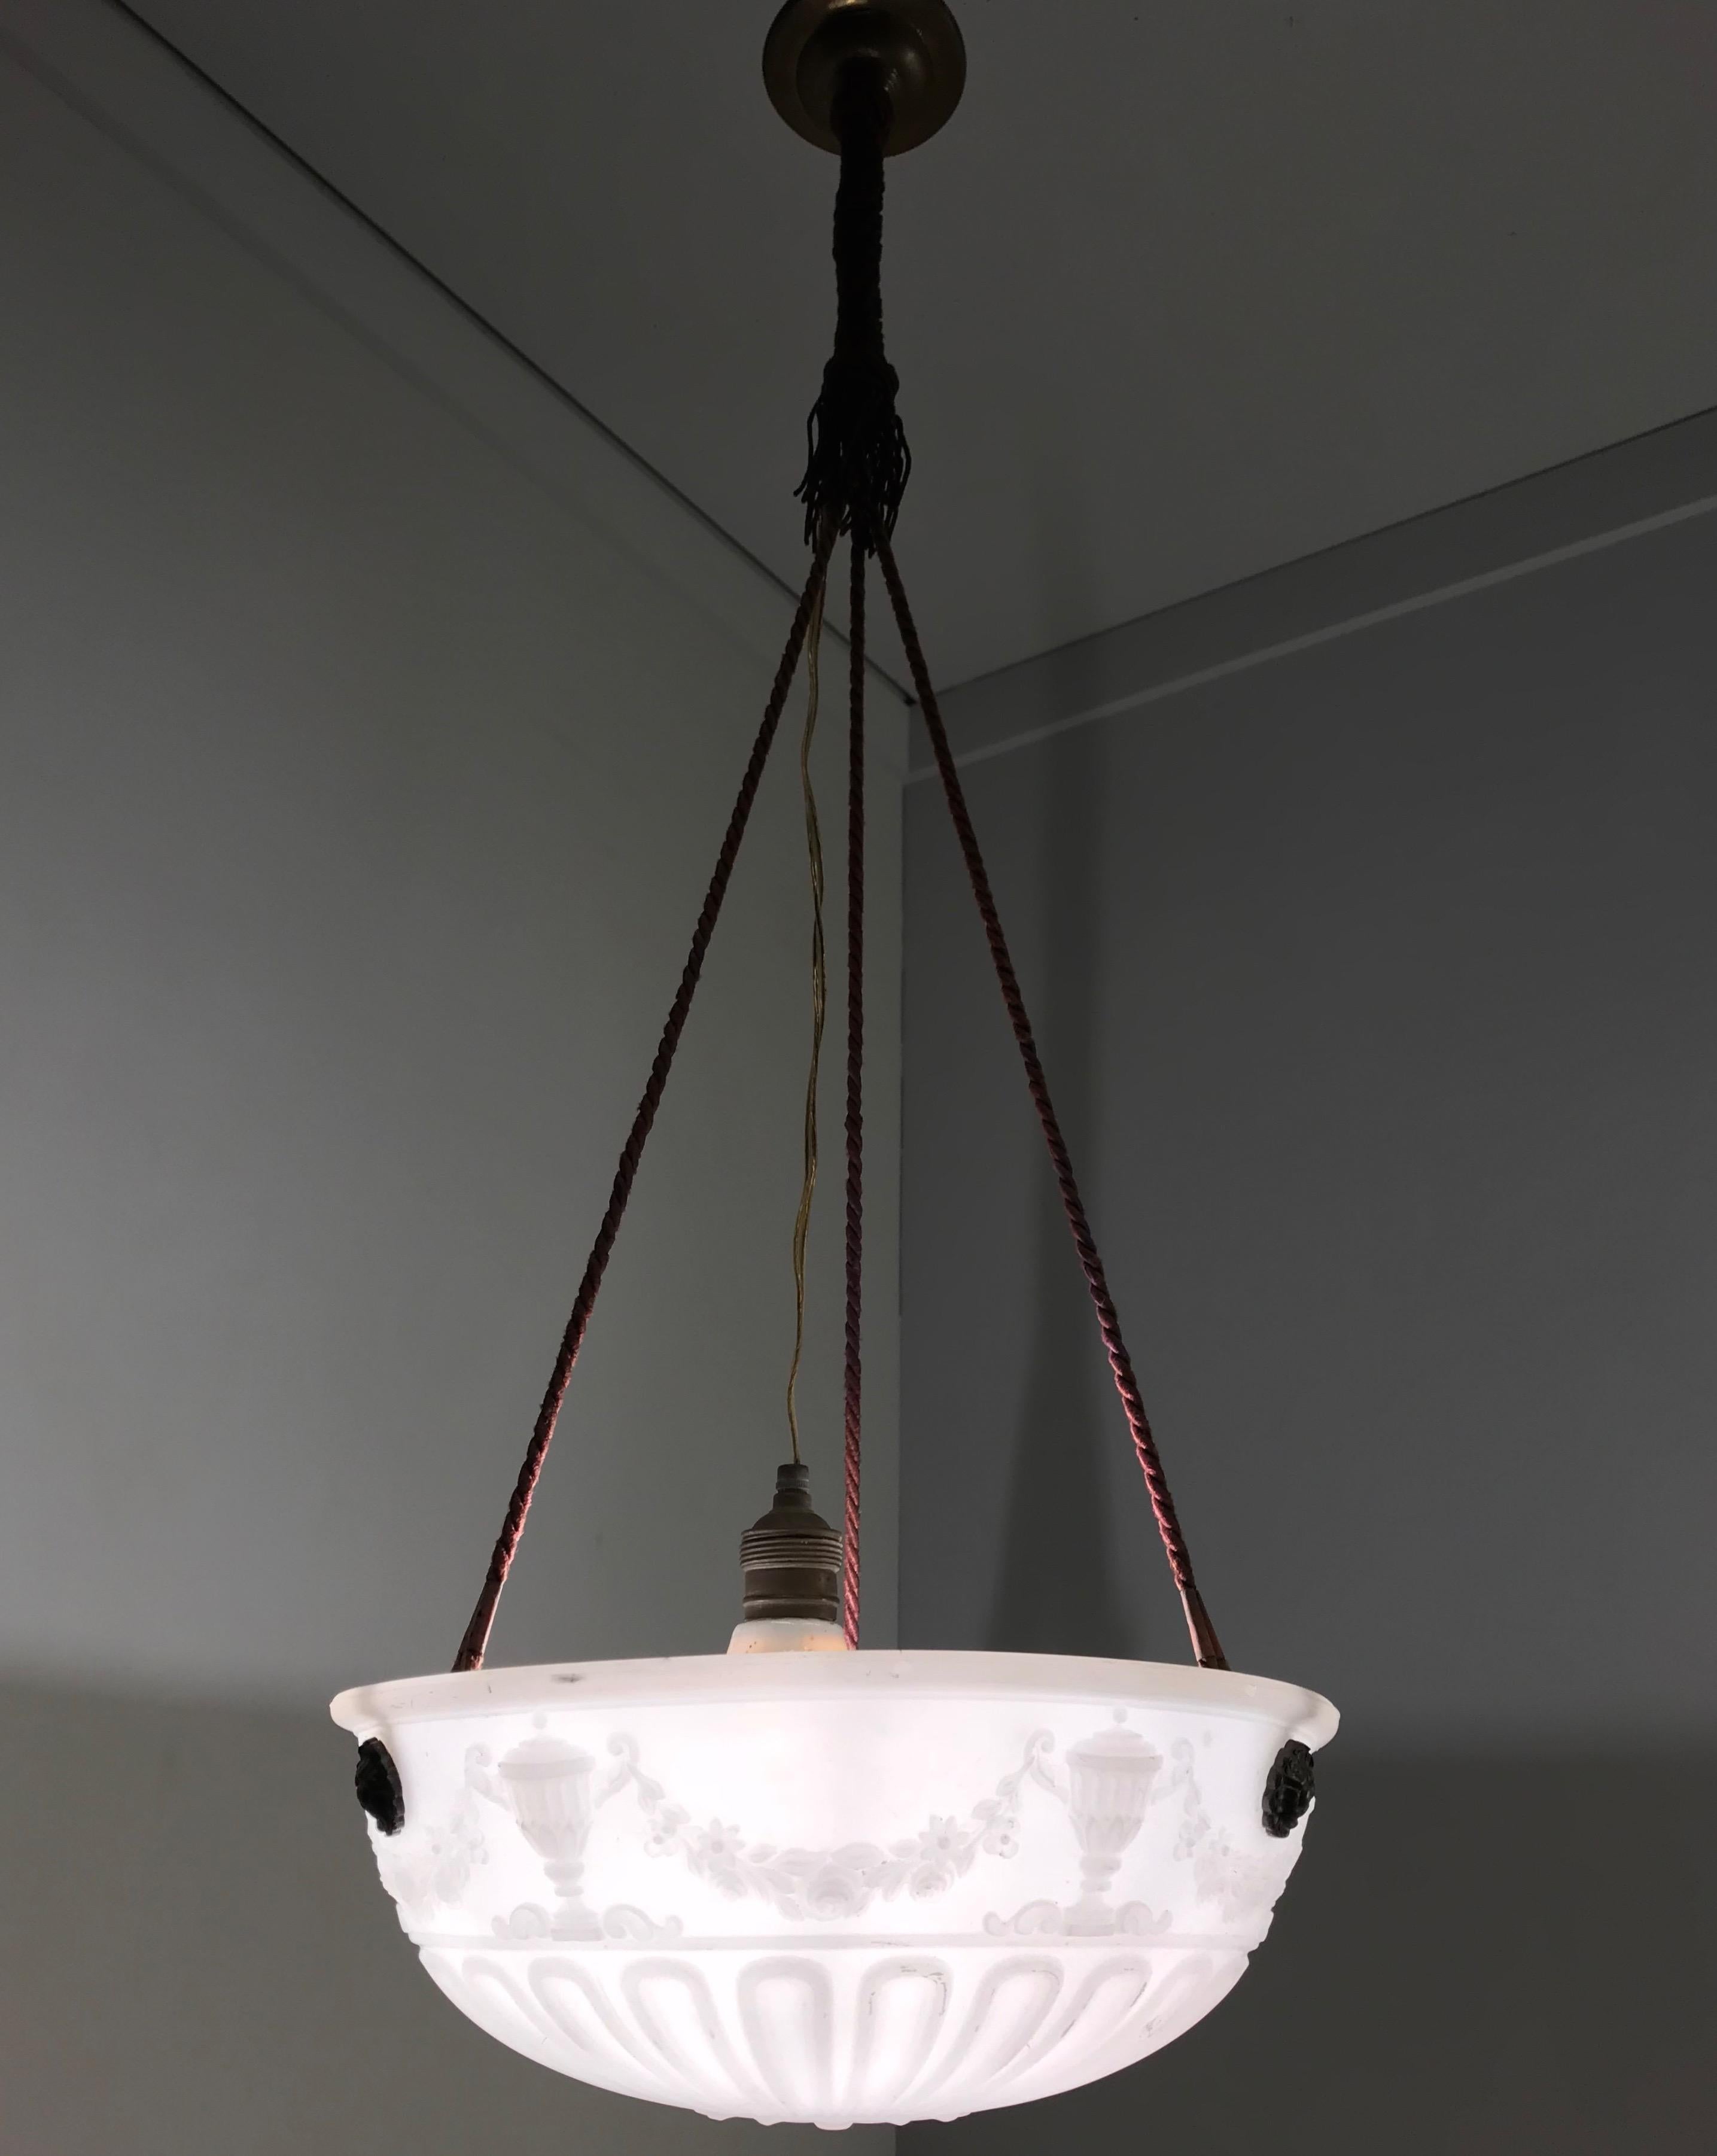 Striking Classical Design Press Glass with Original Rope Pendant / Light Fixture For Sale 7